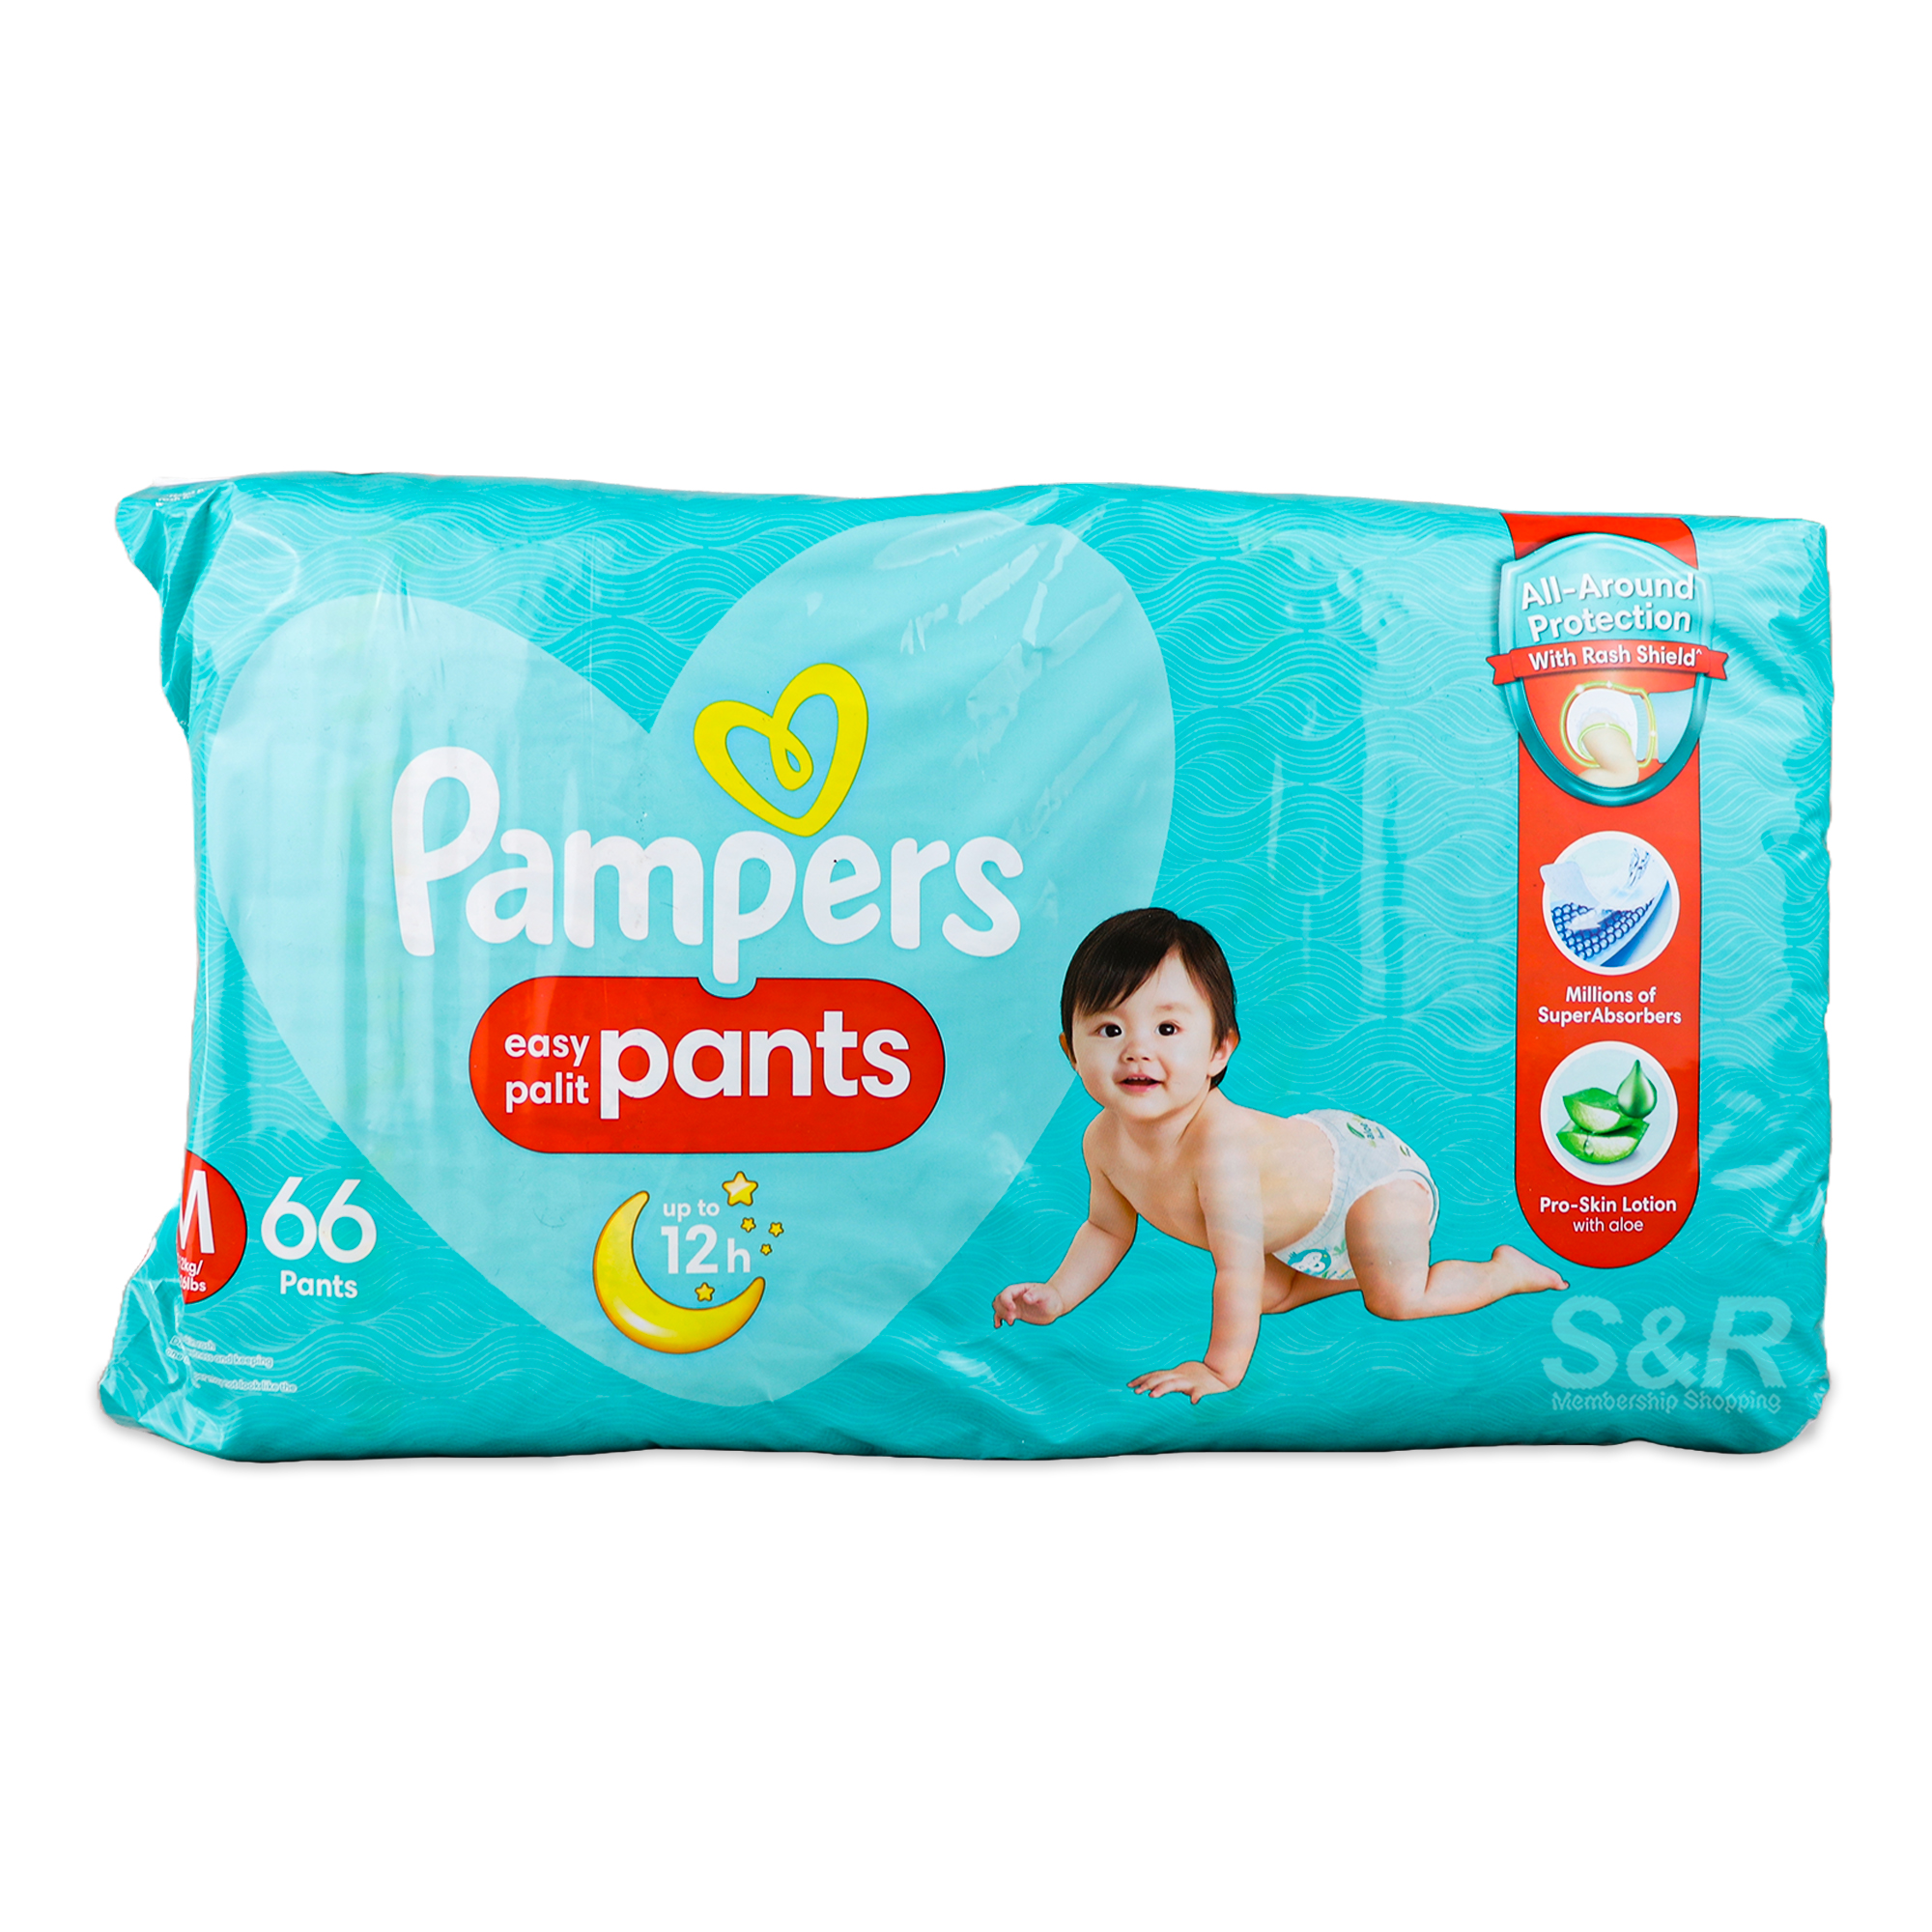 Buy Pampers Diaper Pants, Medium, 76 Count & Pampers Diaper Pants Super  Value Box, Medium (Pack of 200) Online at Low Prices in India - Amazon.in